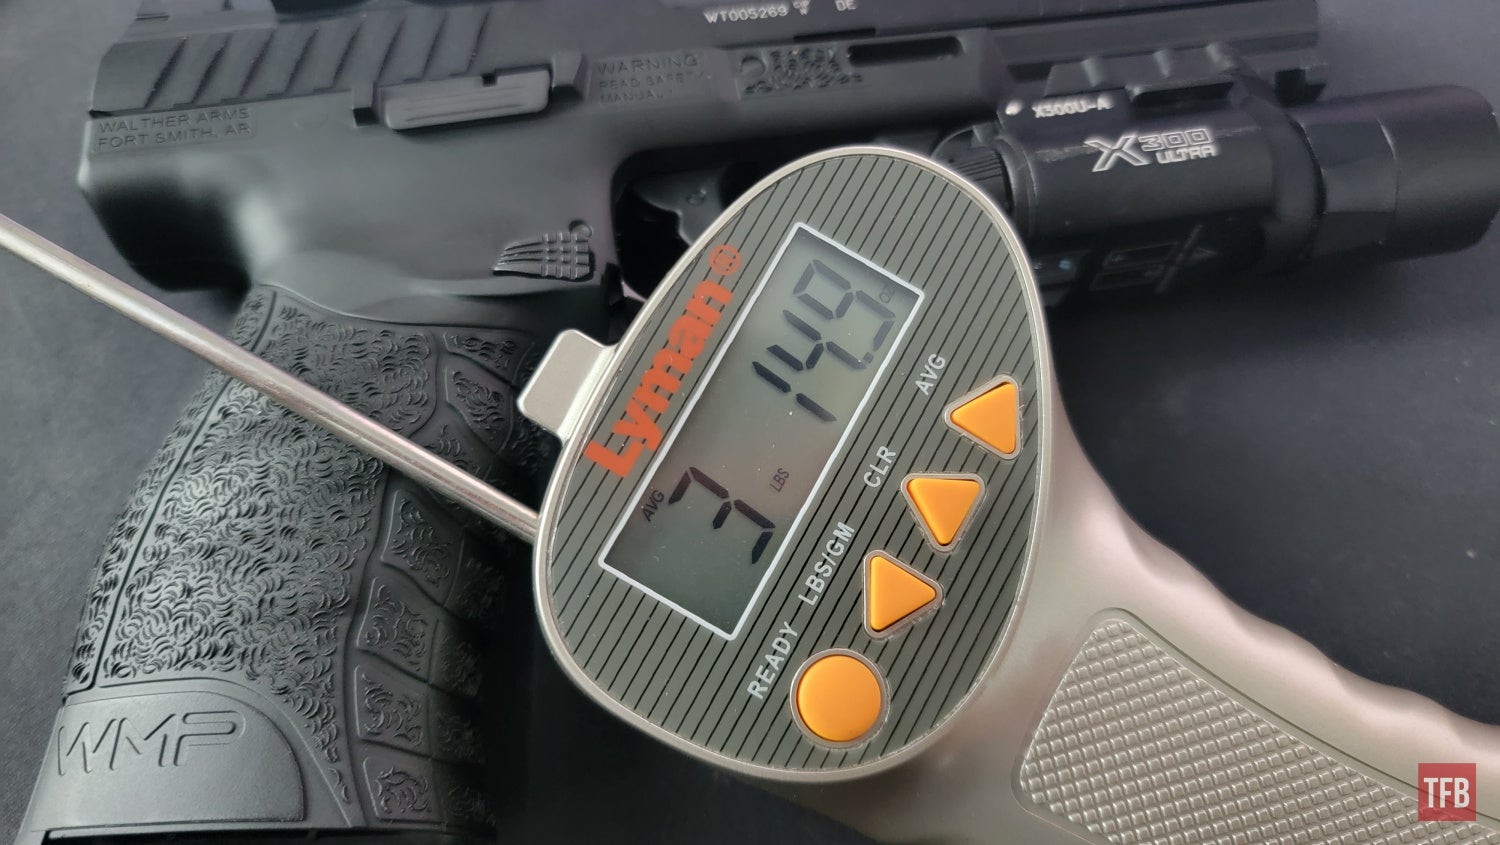 The Rimfire Report: Reviewing the Walther WMP 22WMR Pistol